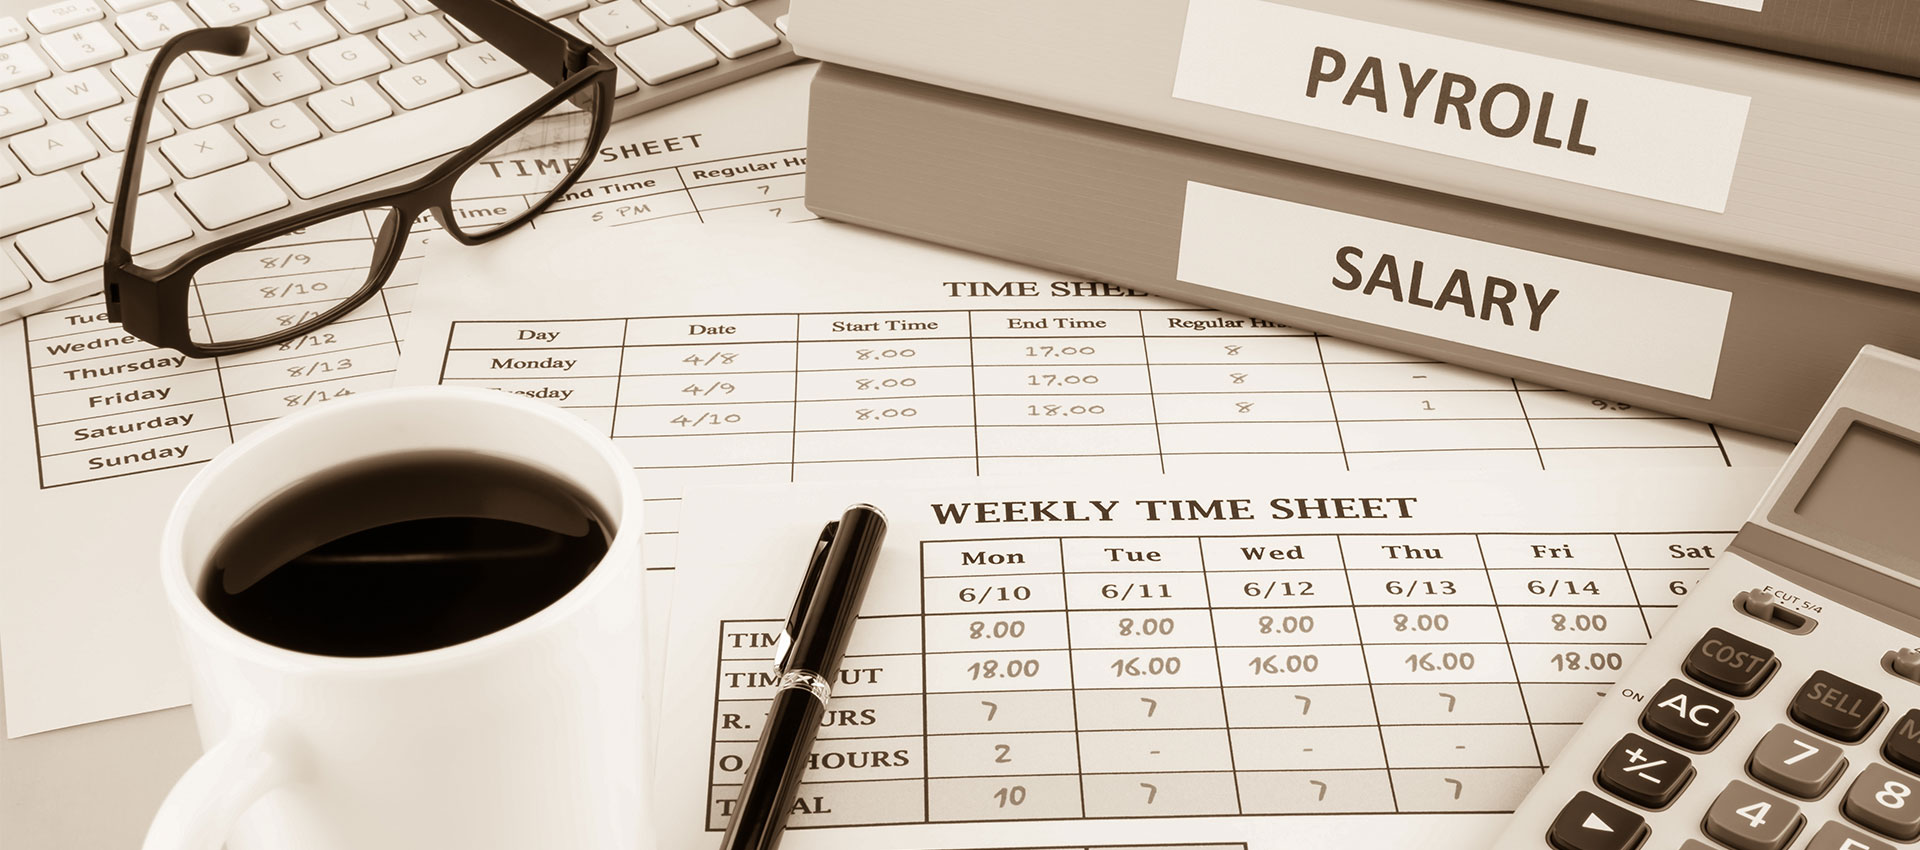 Payroll - Accounting Services